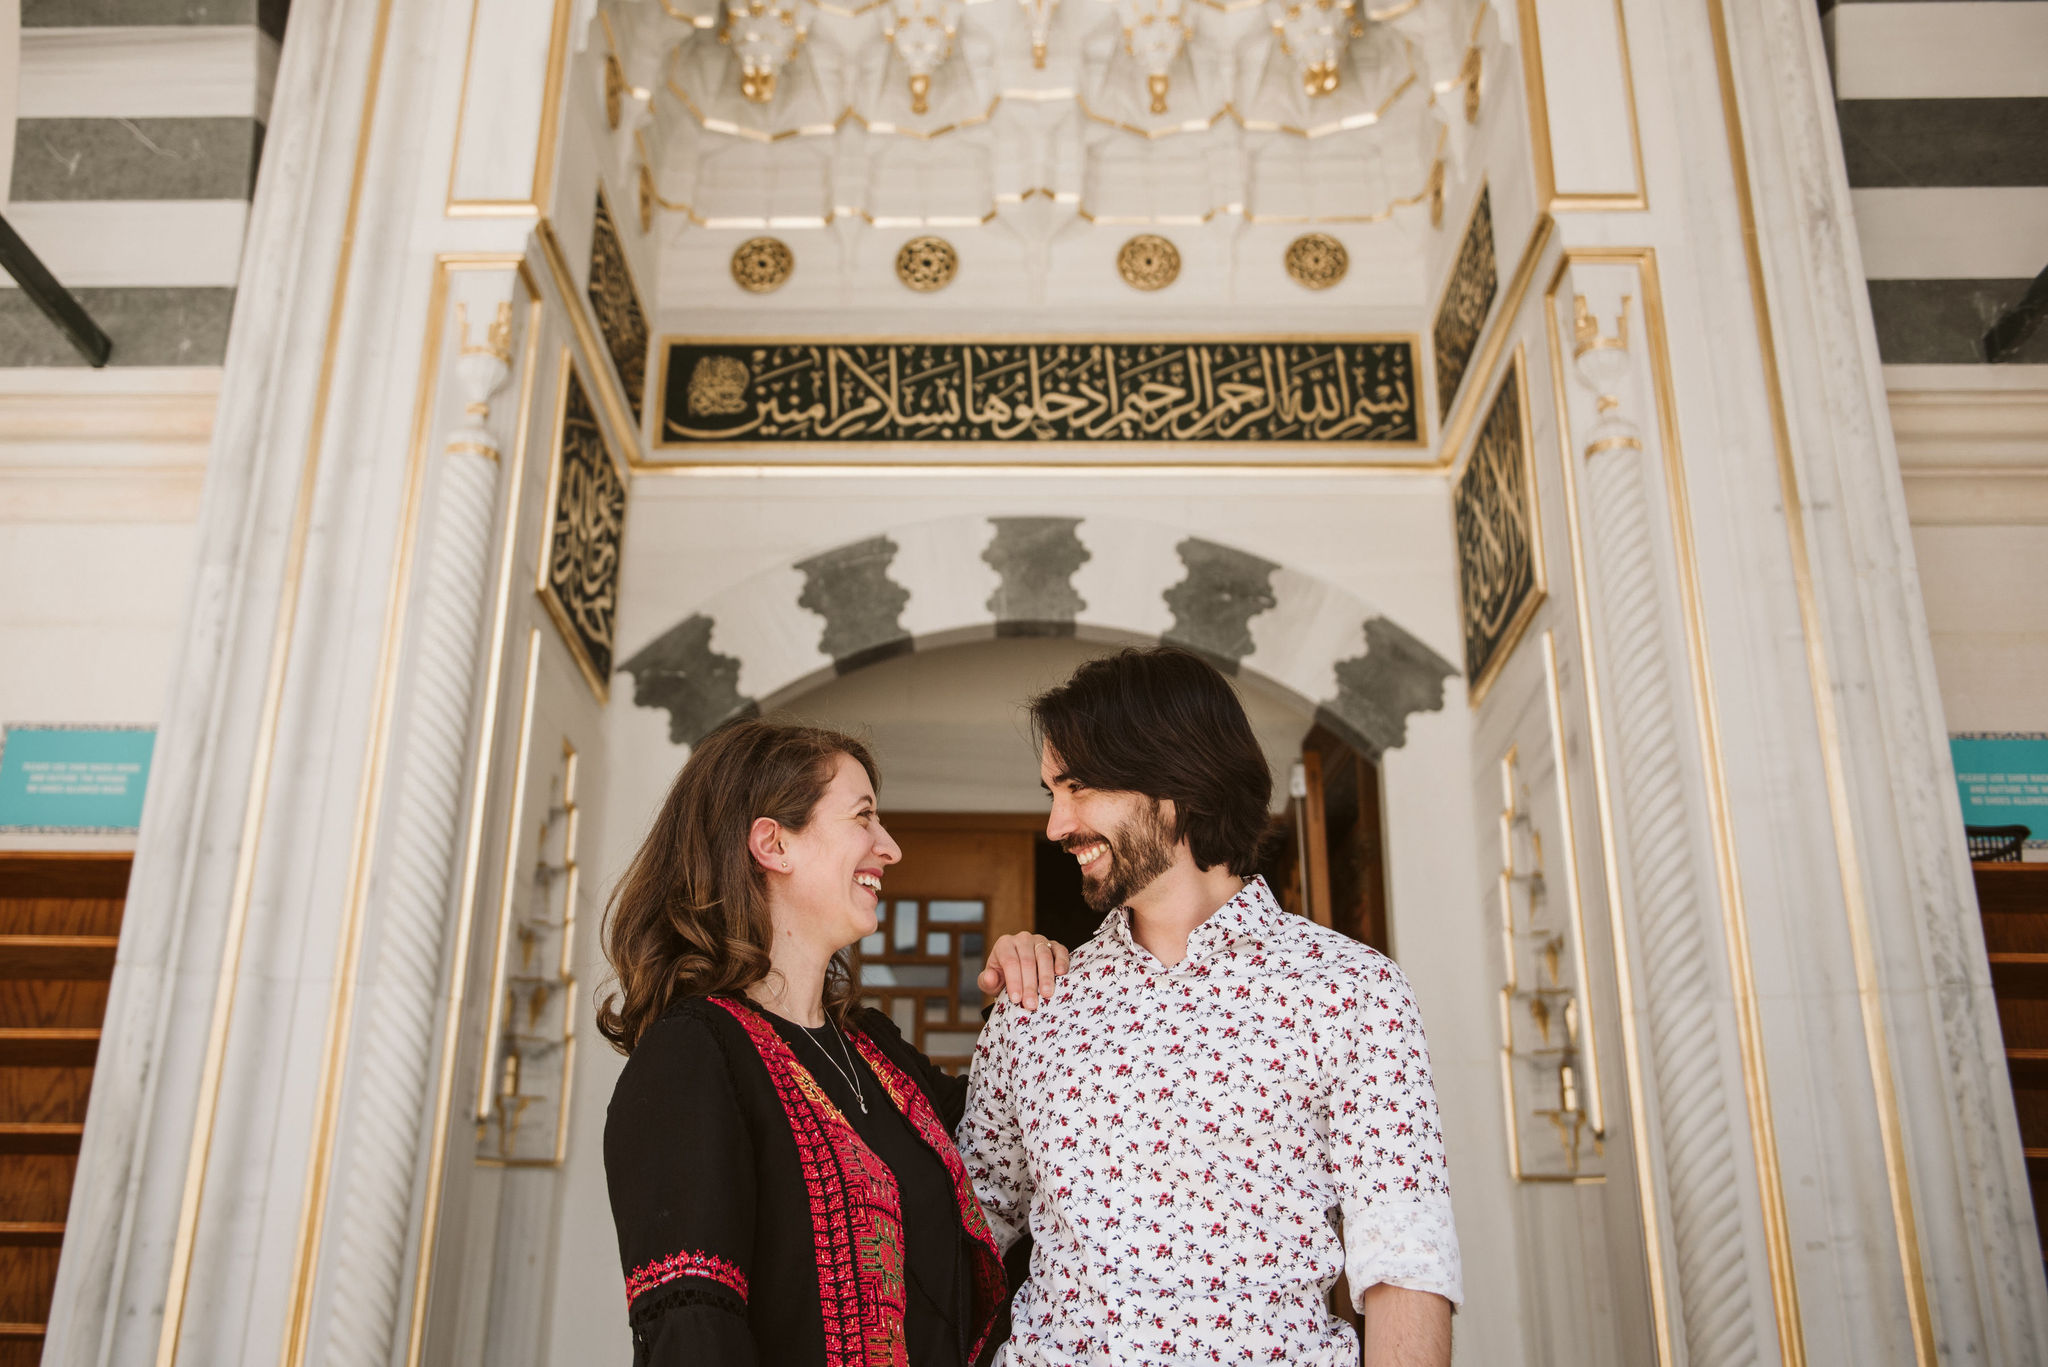  Washington DC, Baltimore Wedding Photographer, Diyanet Center of America, Spring, Intimate Wedding, Traditional, Classic, Palestinian, Turkish Design, Bride and groom Smiling Together After Ceremony, Just Married 